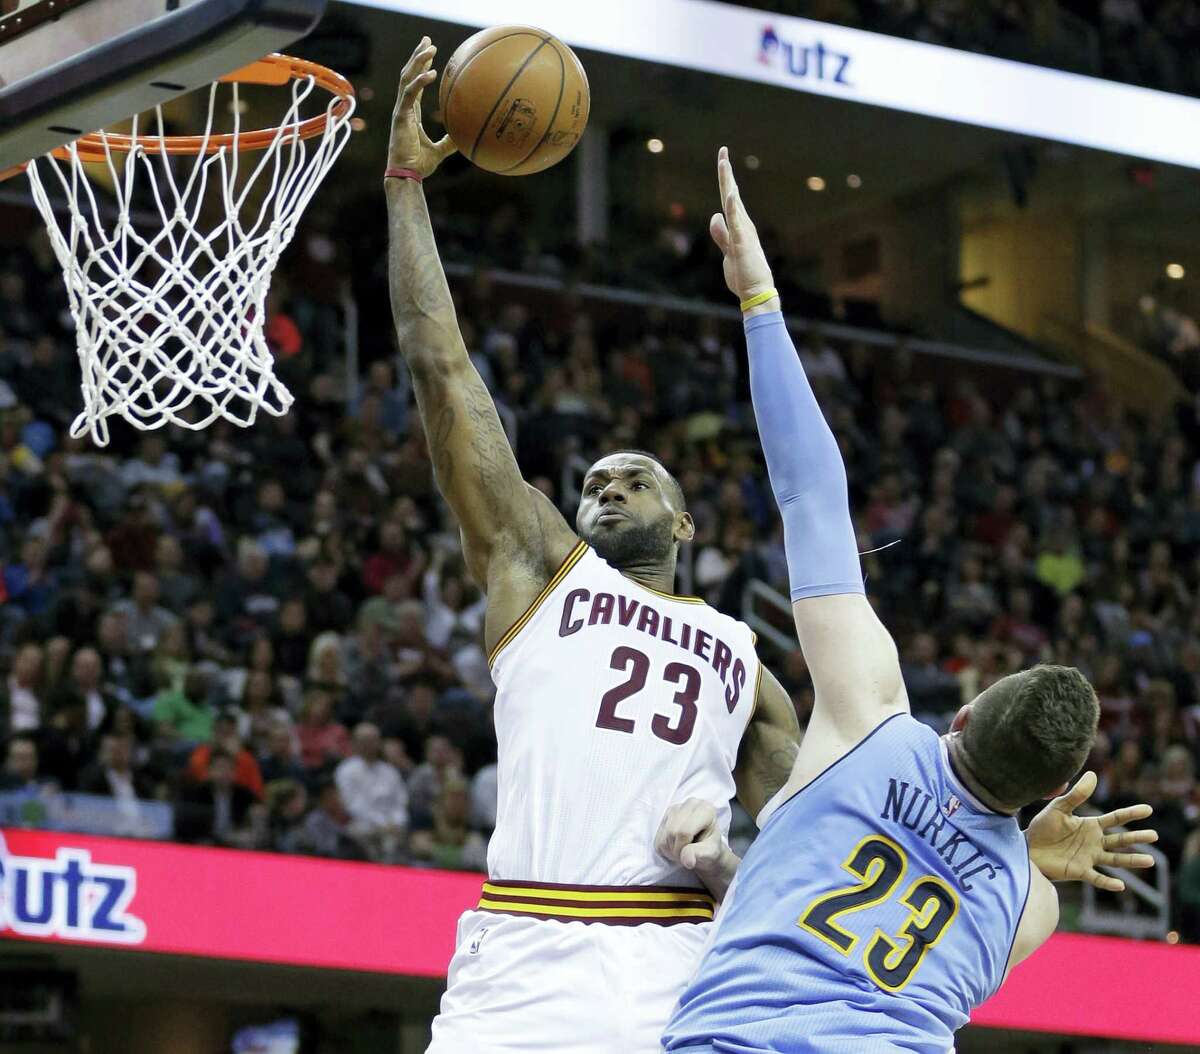 LeBron James, left, drives to the basket against the Nuggets’ Jusuf Nurkic on Monday in Cleveland.